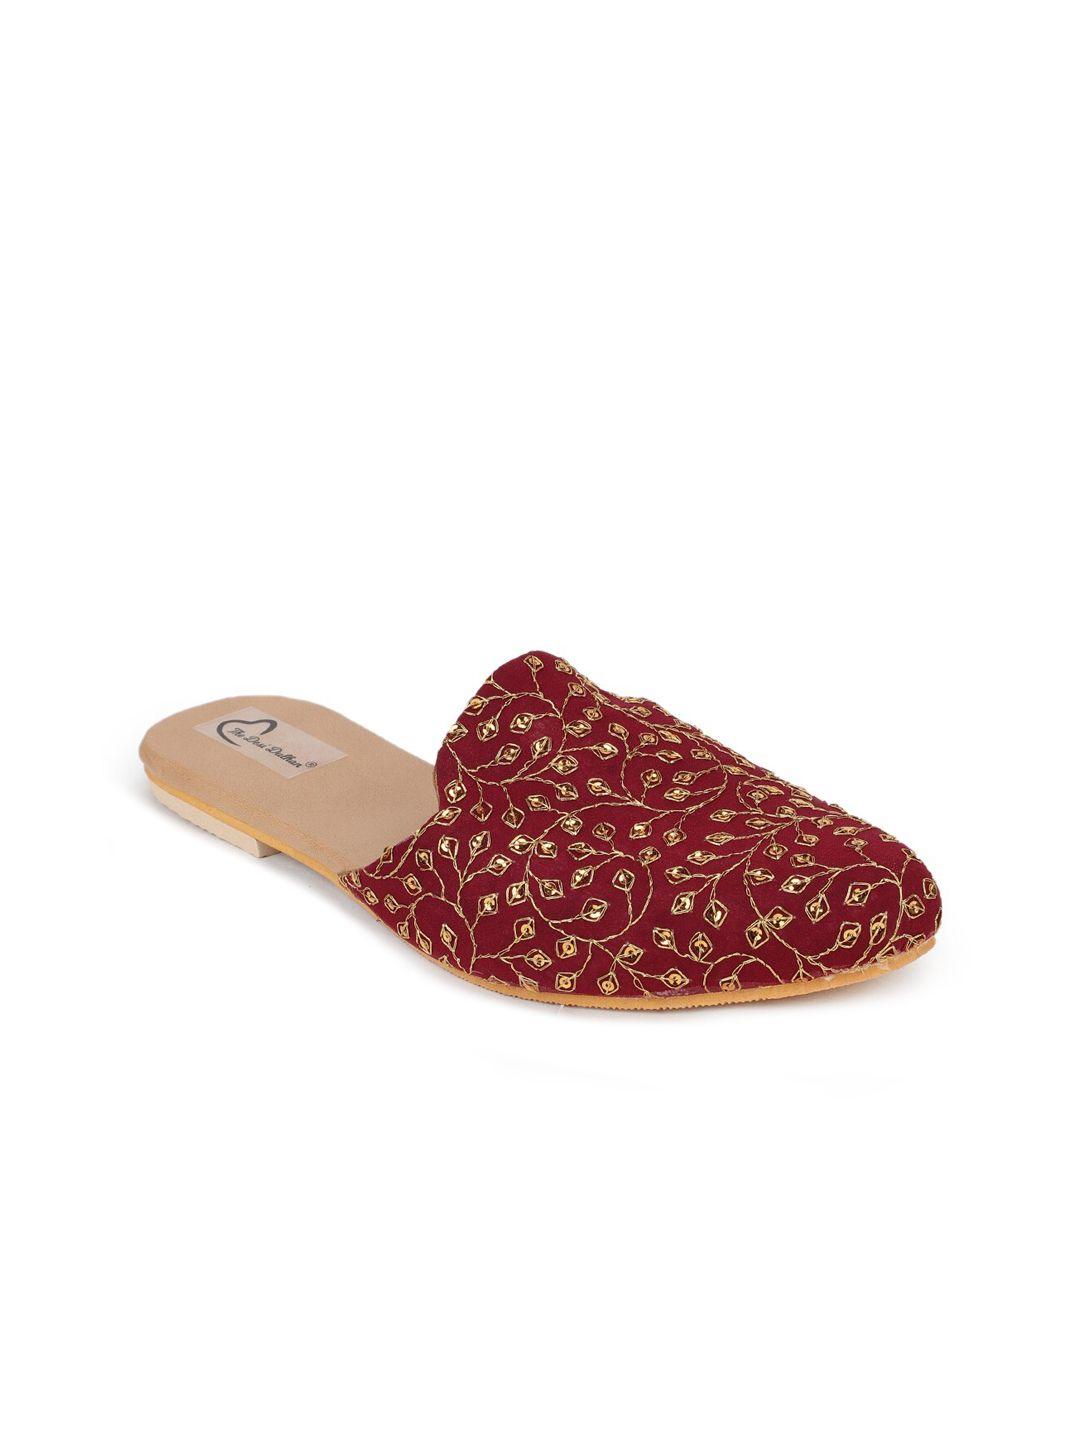 the-desi-dulhan-women-maroon-embellished-leather-ethnic-embroidered-flats